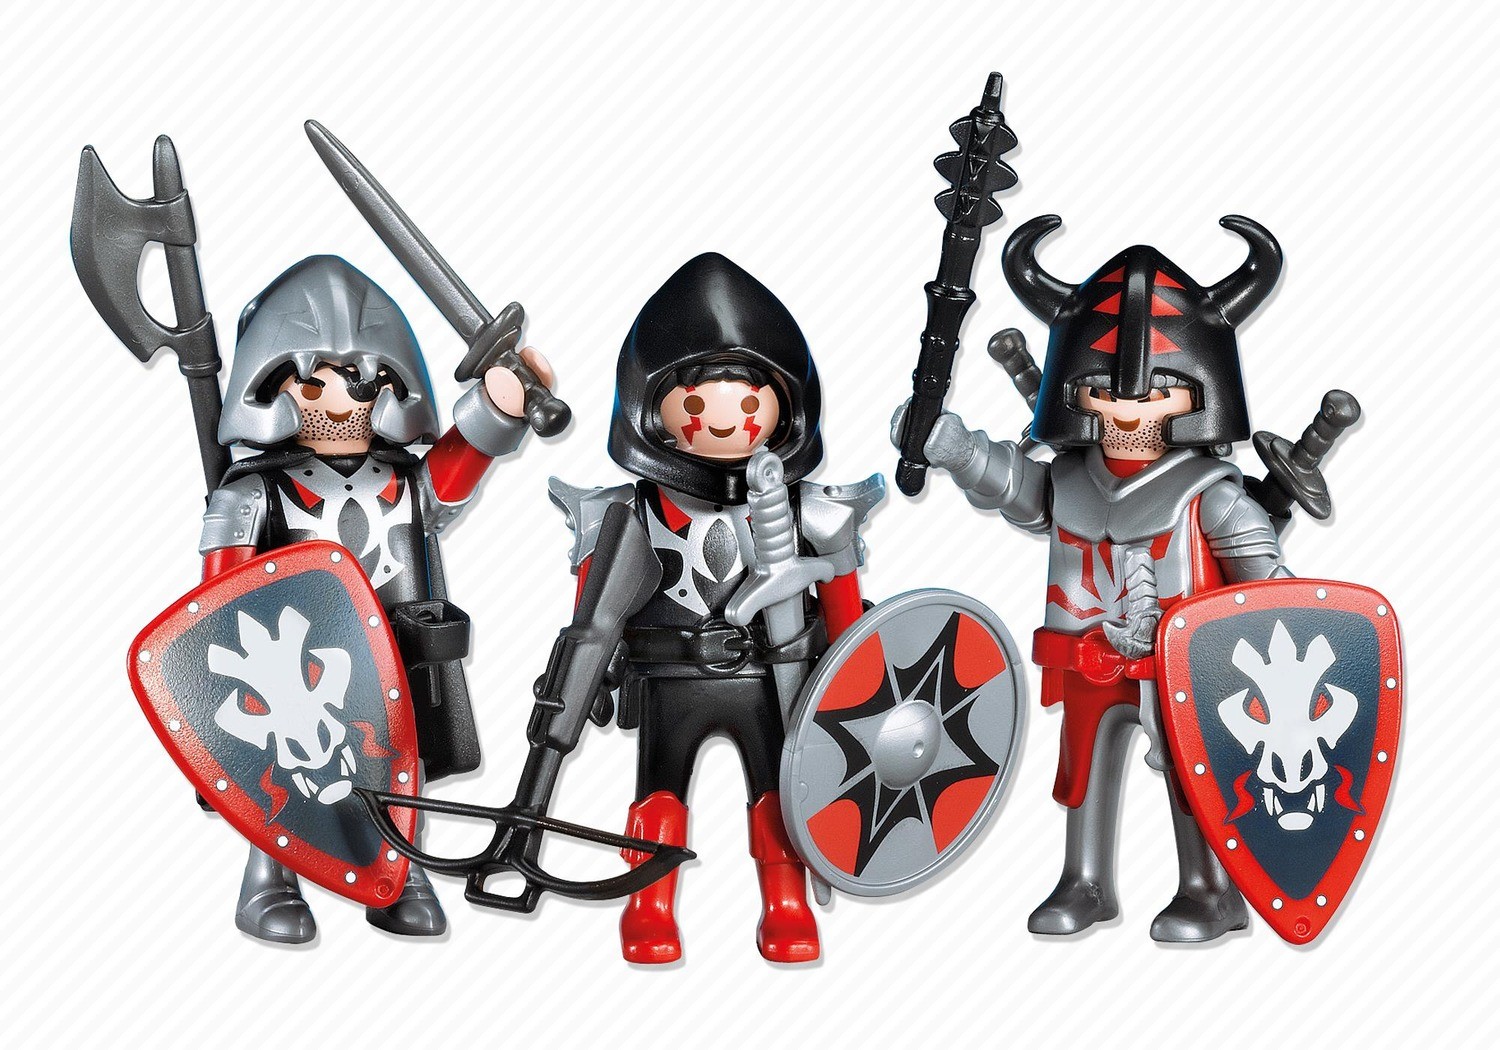 playmobil chevalier rouge